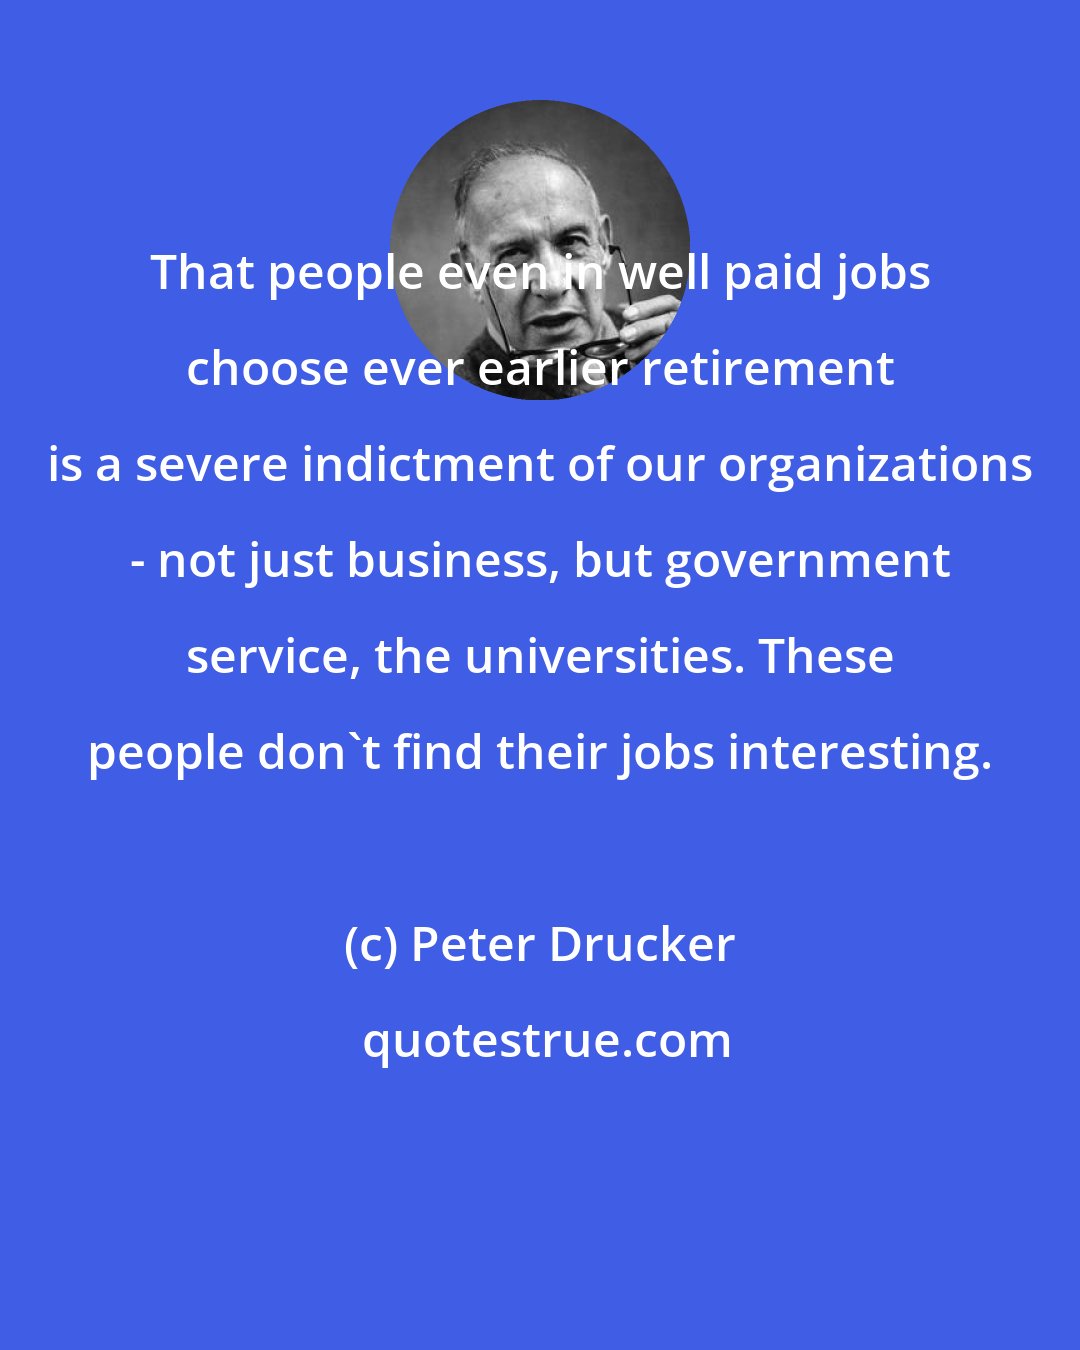 Peter Drucker: That people even in well paid jobs choose ever earlier retirement is a severe indictment of our organizations - not just business, but government service, the universities. These people don't find their jobs interesting.